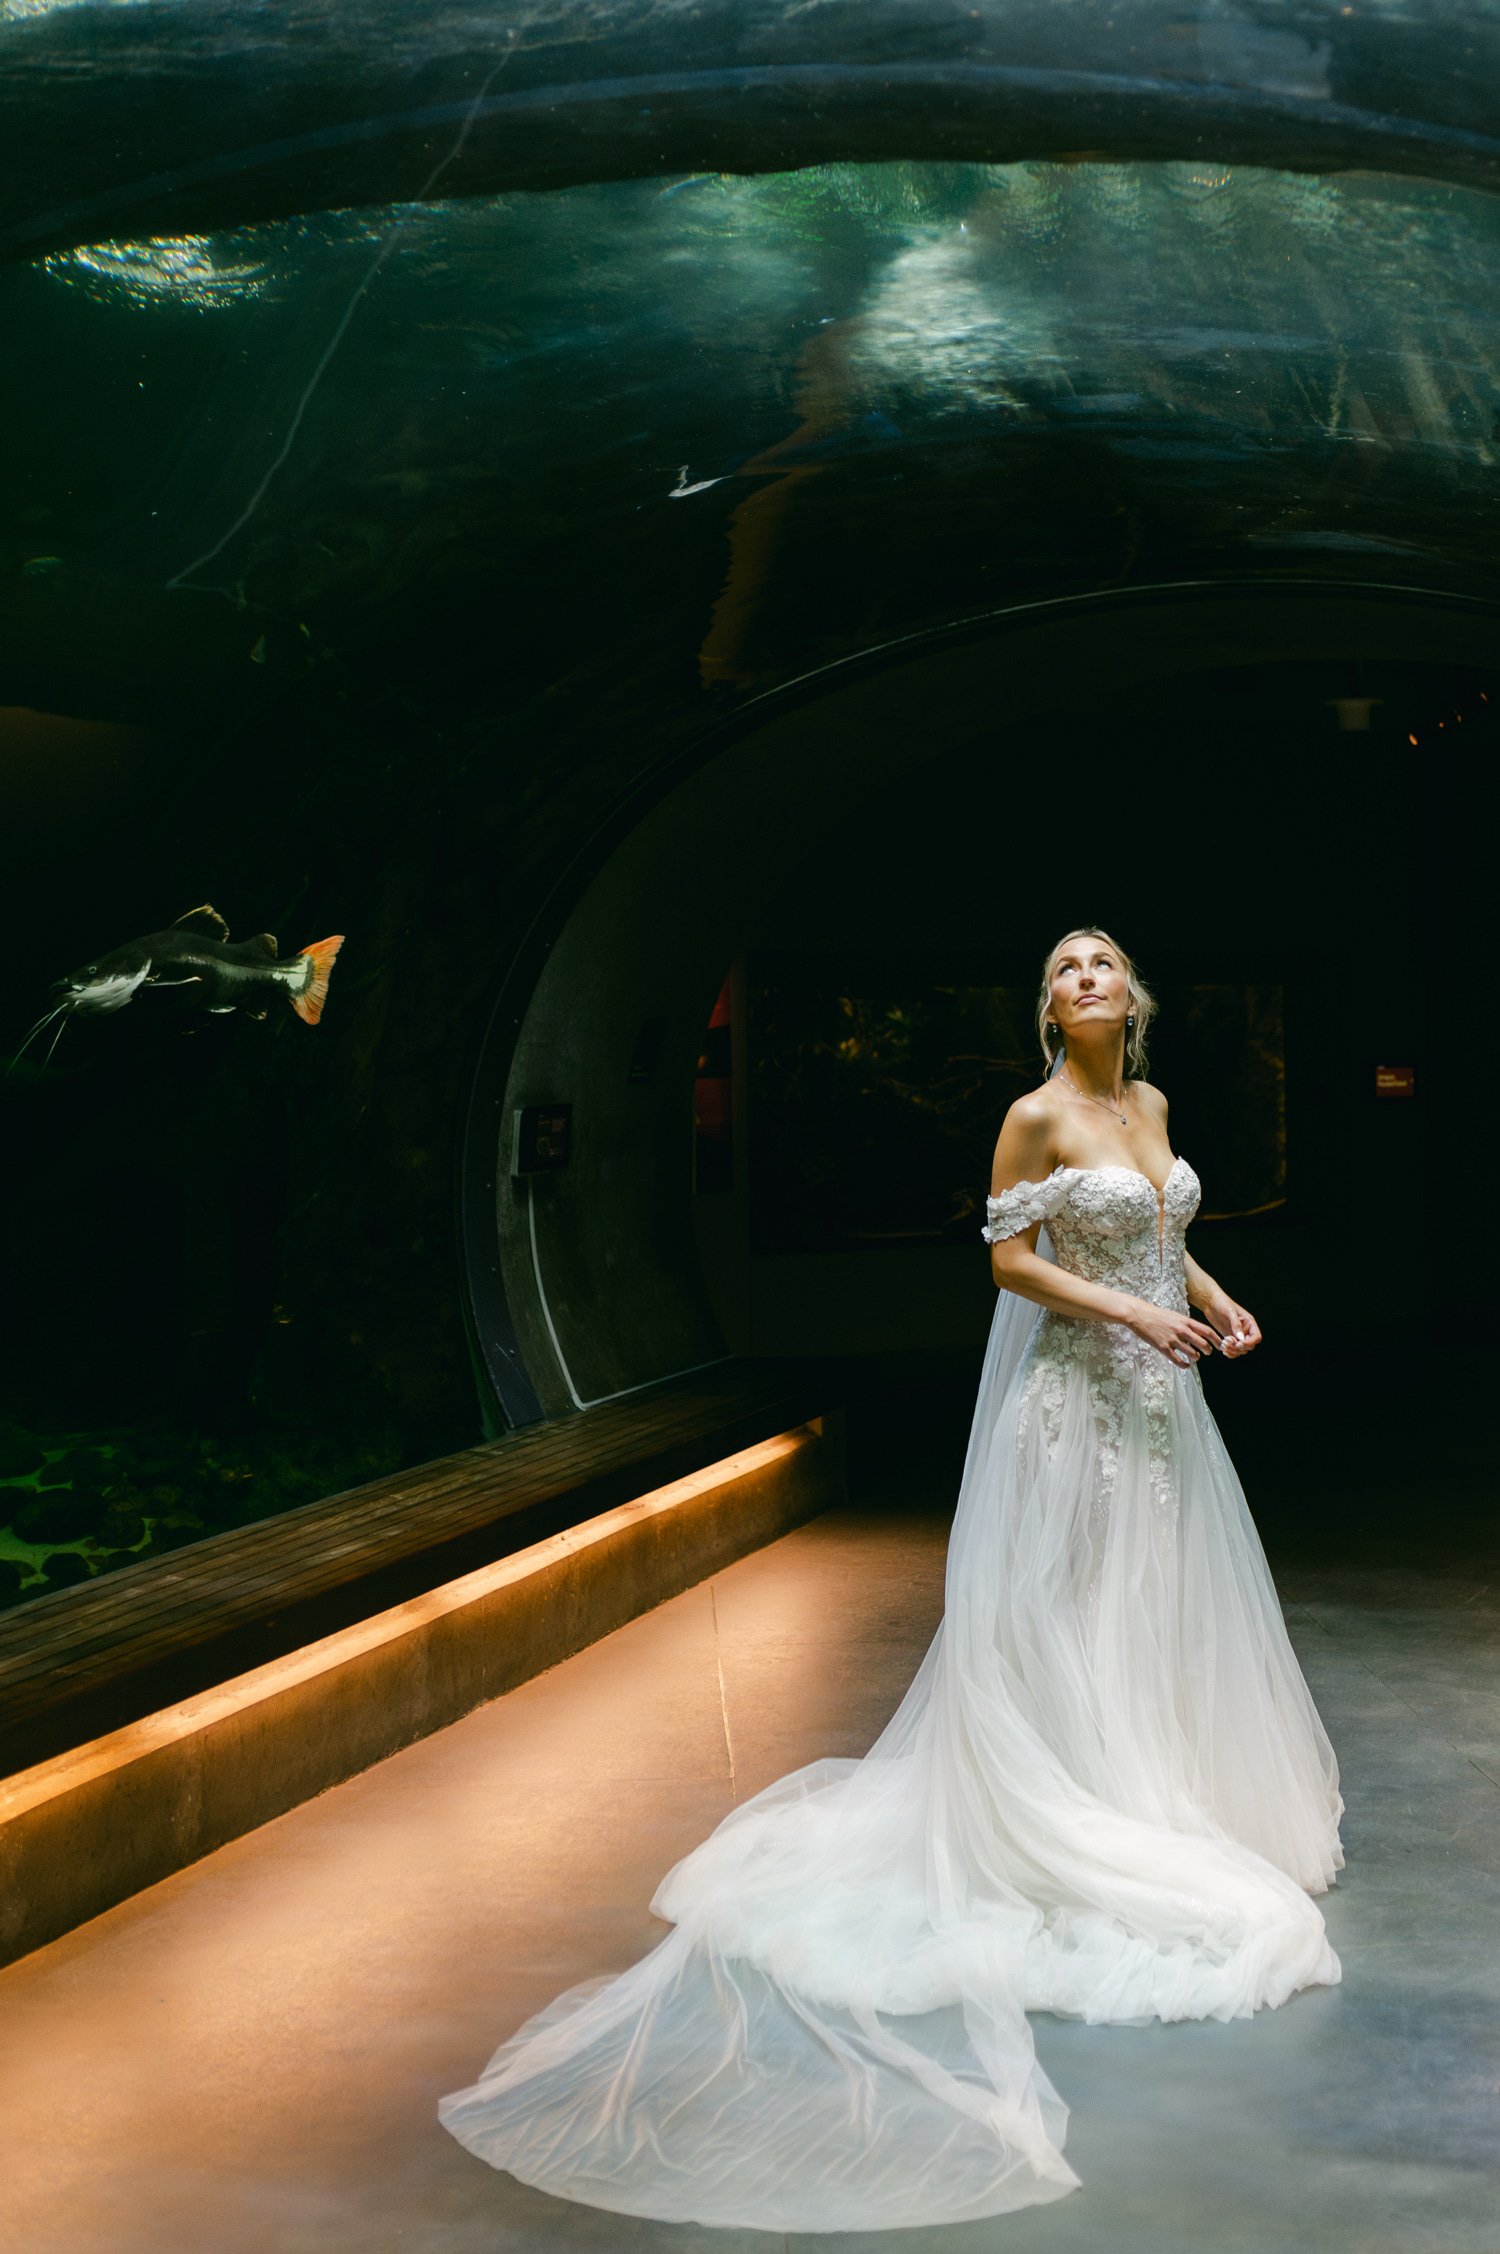 California academy of Sciences in San Francisco Wedding, photo of the bride in her beautiful long off-shoulder wedding dress looking at the fishes in the aquarium